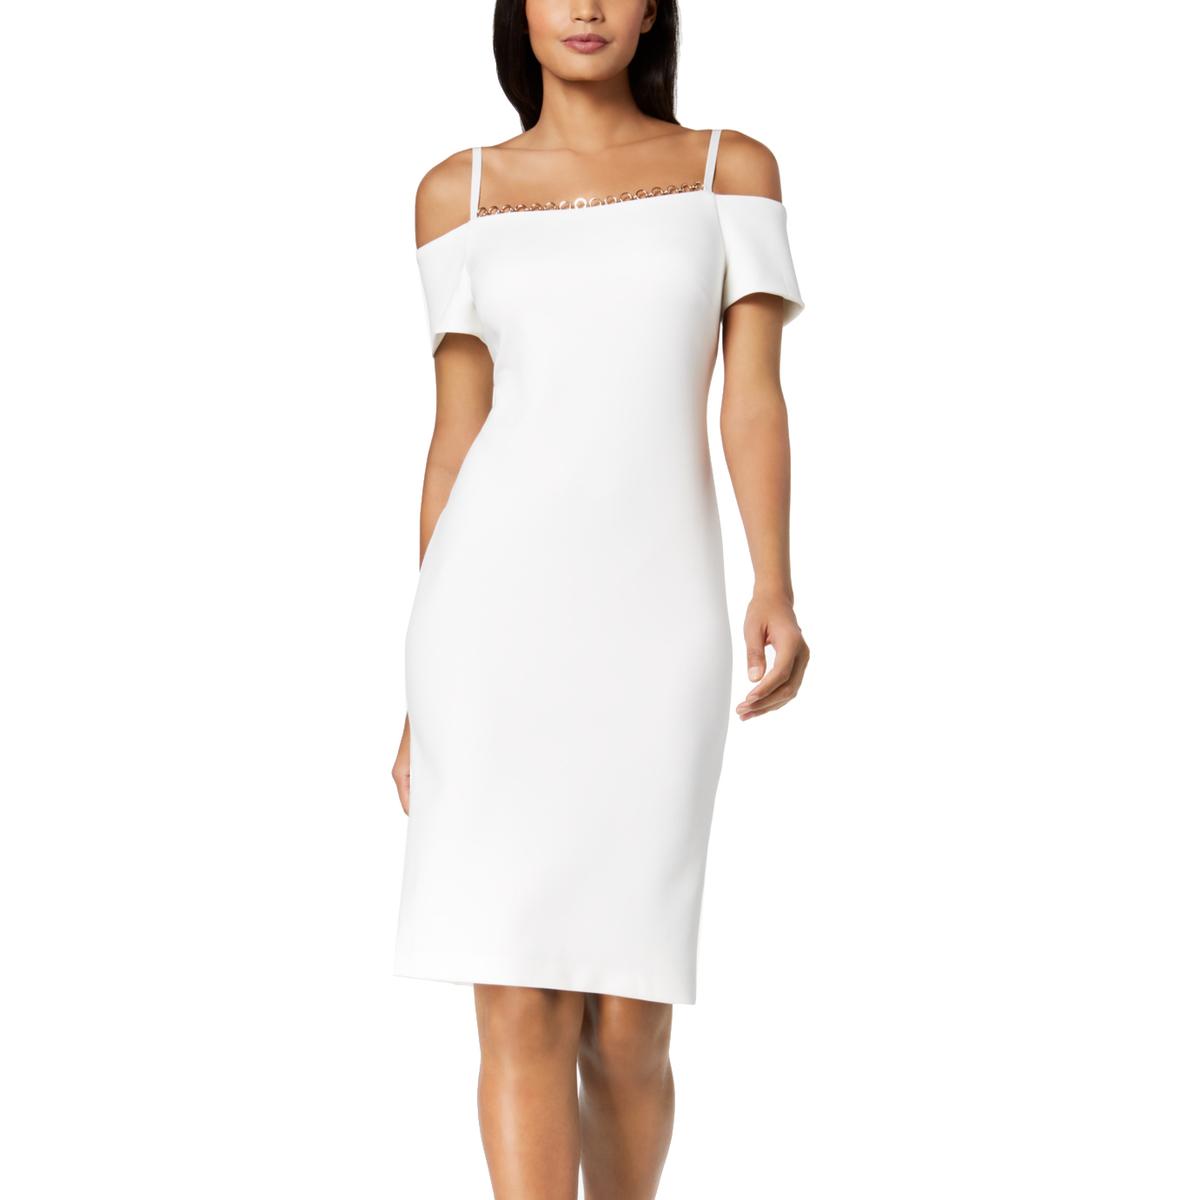 Calvin Klein Womens White Embellished Party Cocktail Dress 14 BHFO 8644 ...